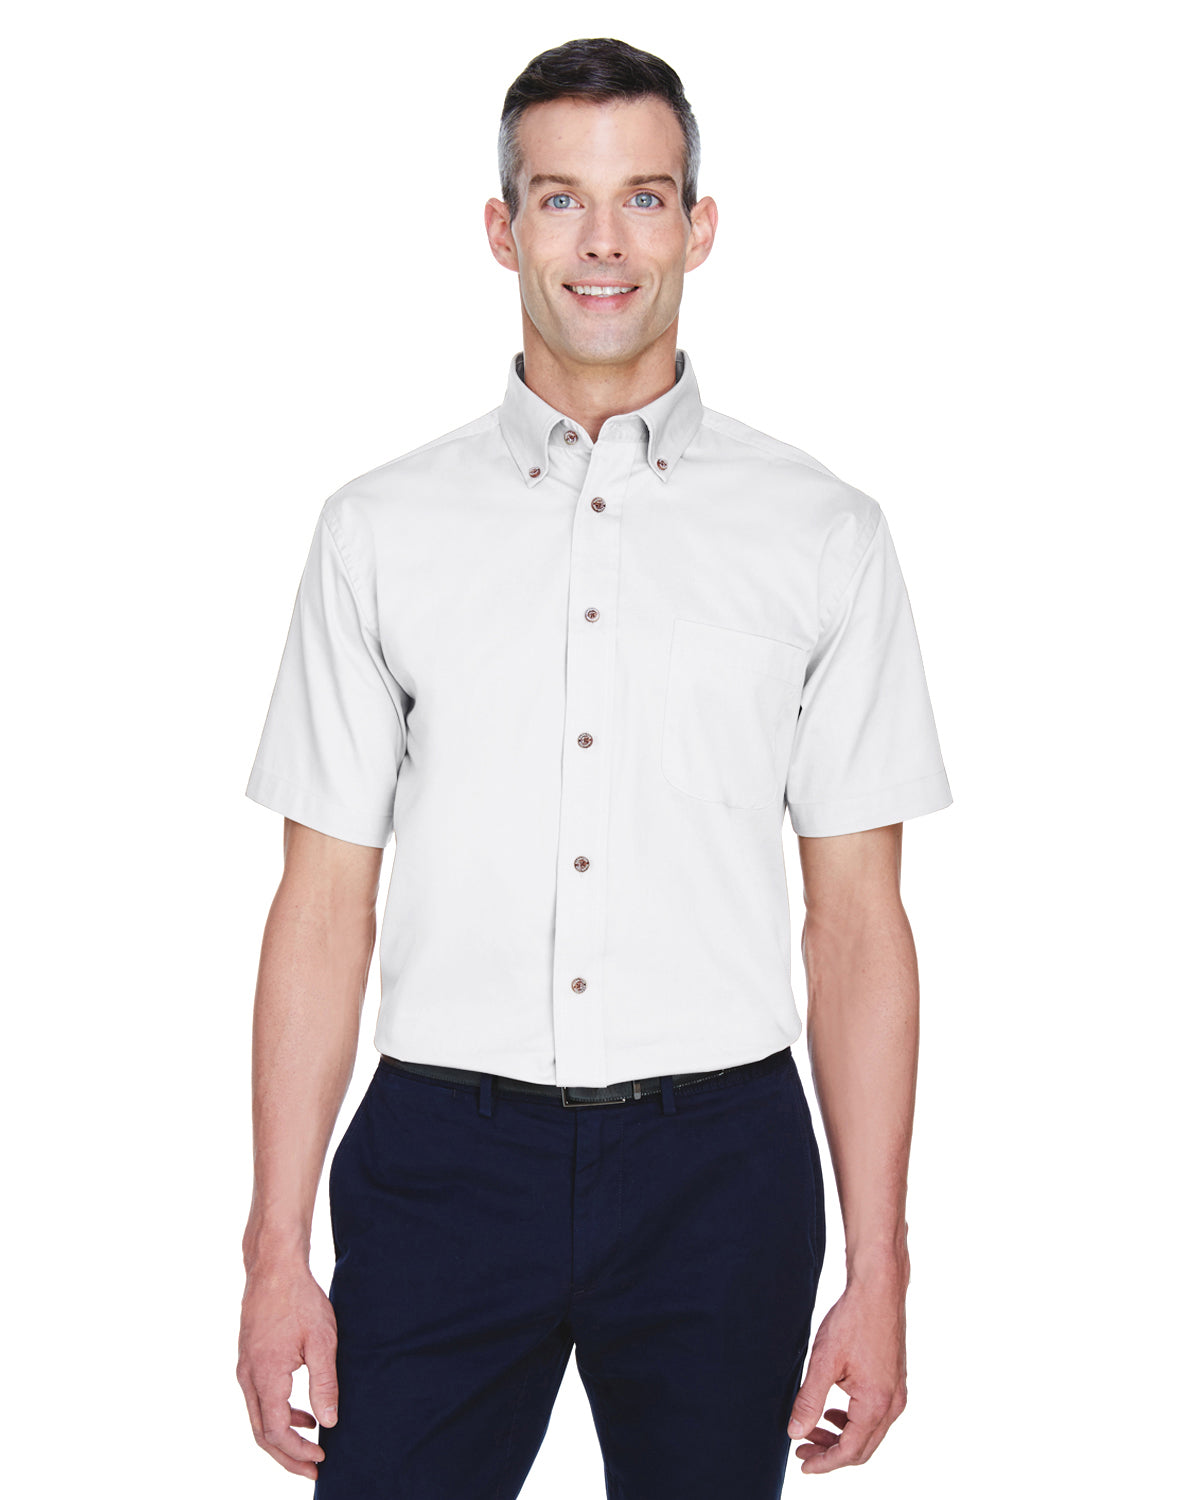 Men's Easy Blend Short Sleeve Twill Shirt with Stain Release